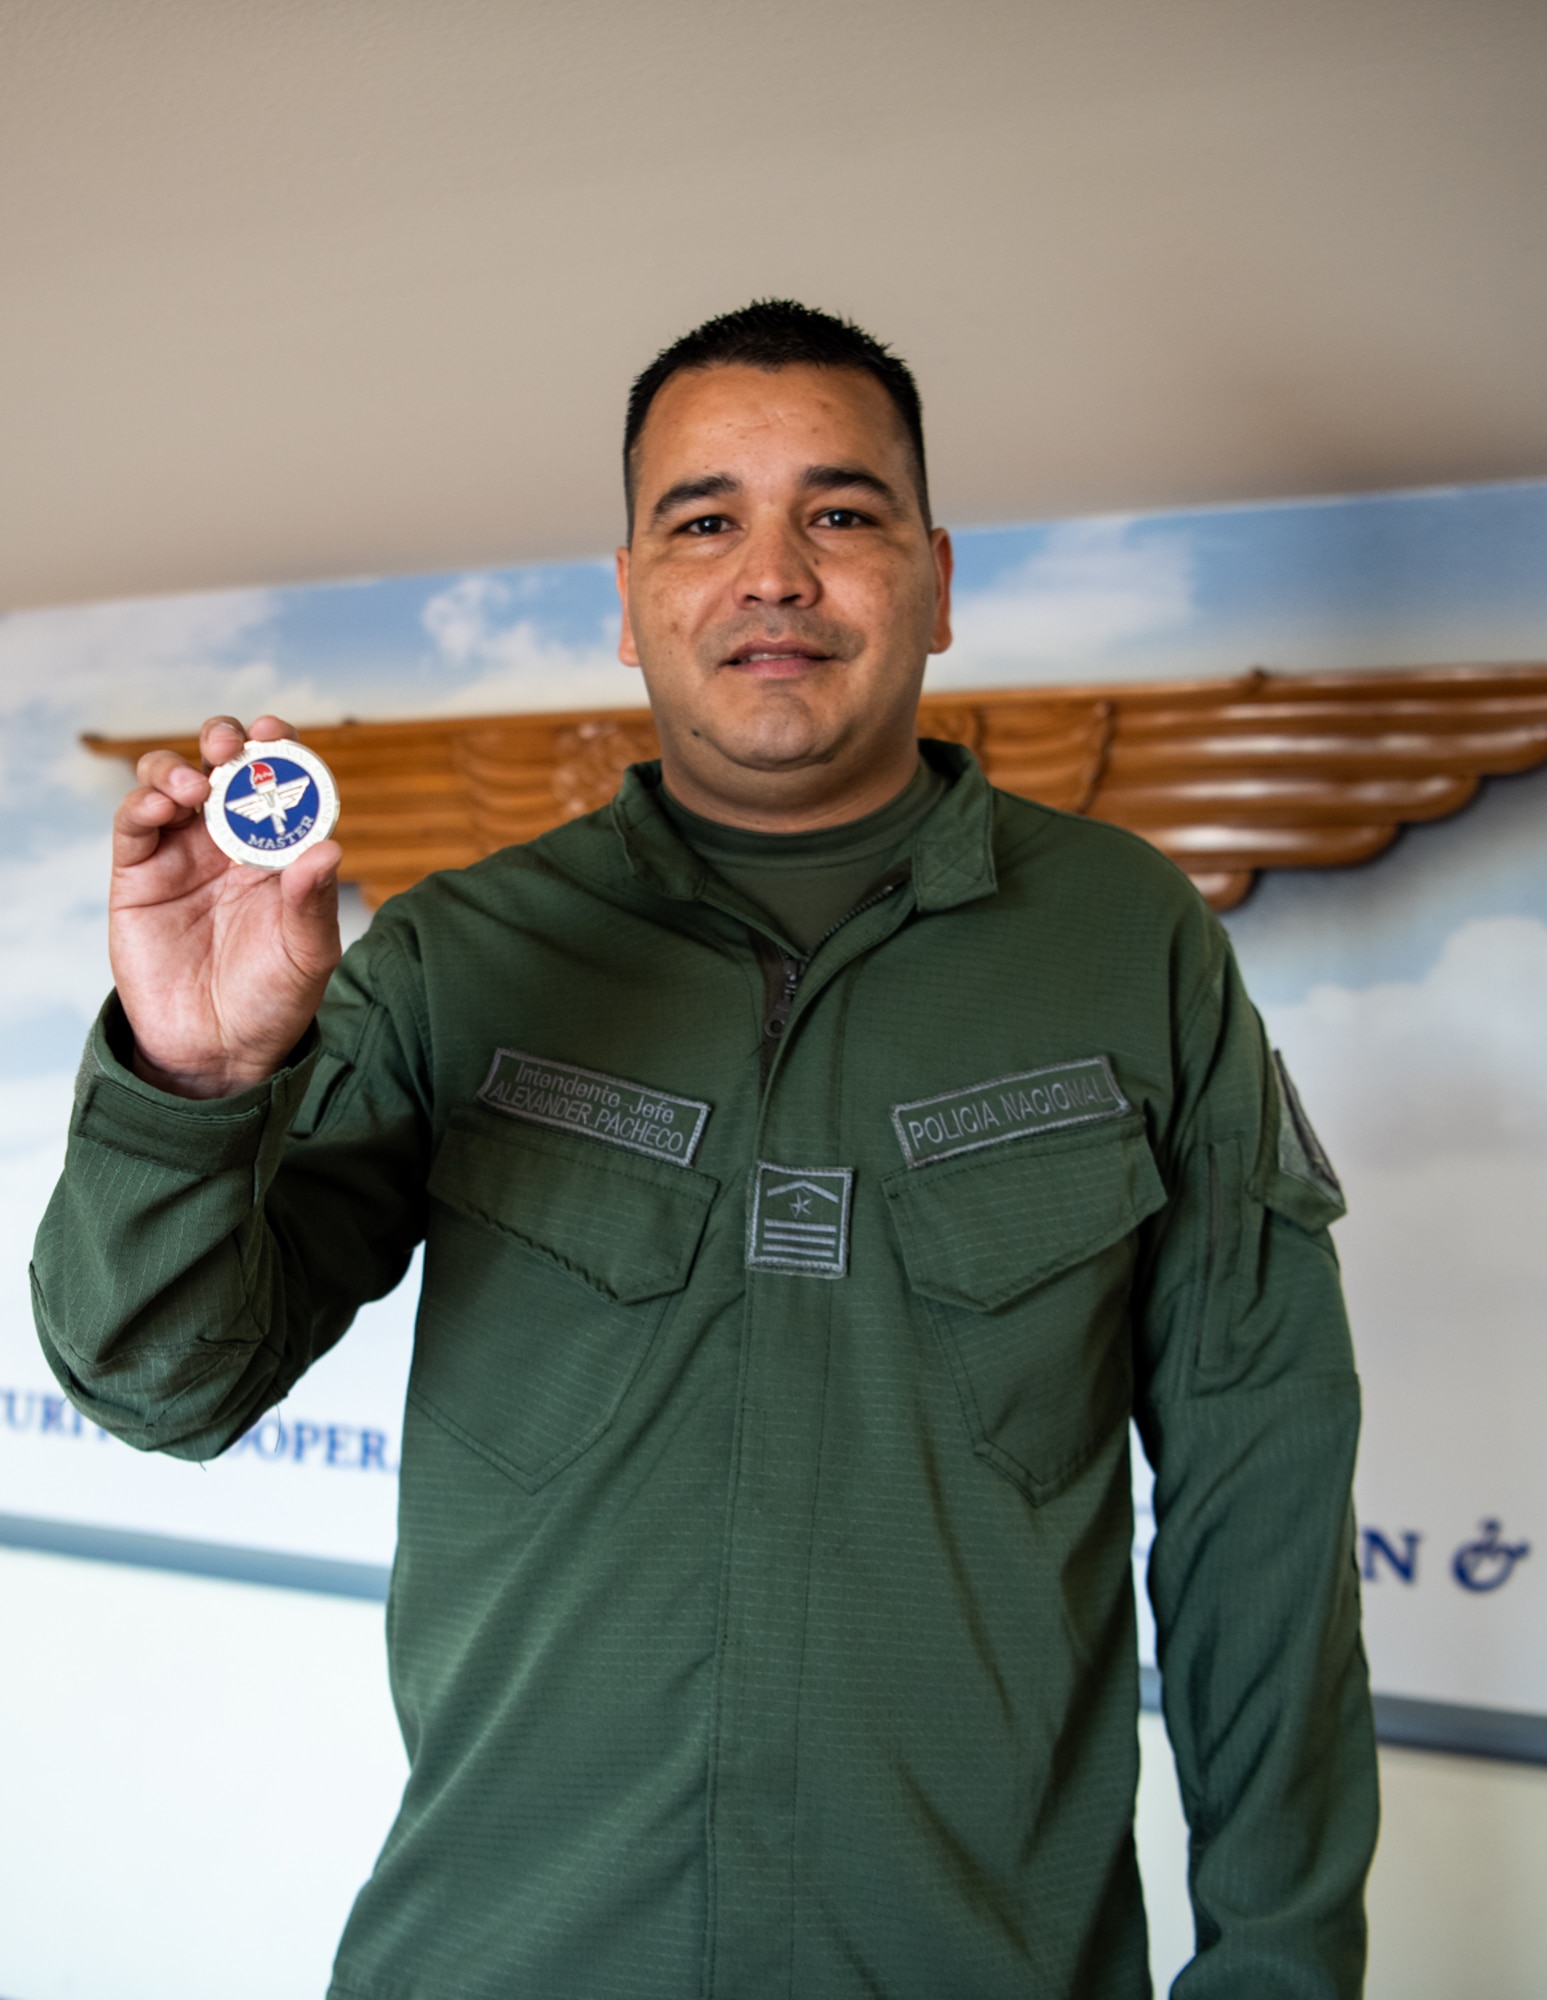 Intendente Jefe Alexander Pacheco of Colombia’s National Police, holds a coin at the Inter-American Air Forces Academy, Feb. 17, 2023. Pacheco, a partner nation guest instructor at IAAFA, recently earned the Air Education Training Command Master Instructor designation. He is the first international member to earn master instructor, which is the highest honor one can earn as an instructor. (U.S. Air Force photo by Vanessa R. Adame)